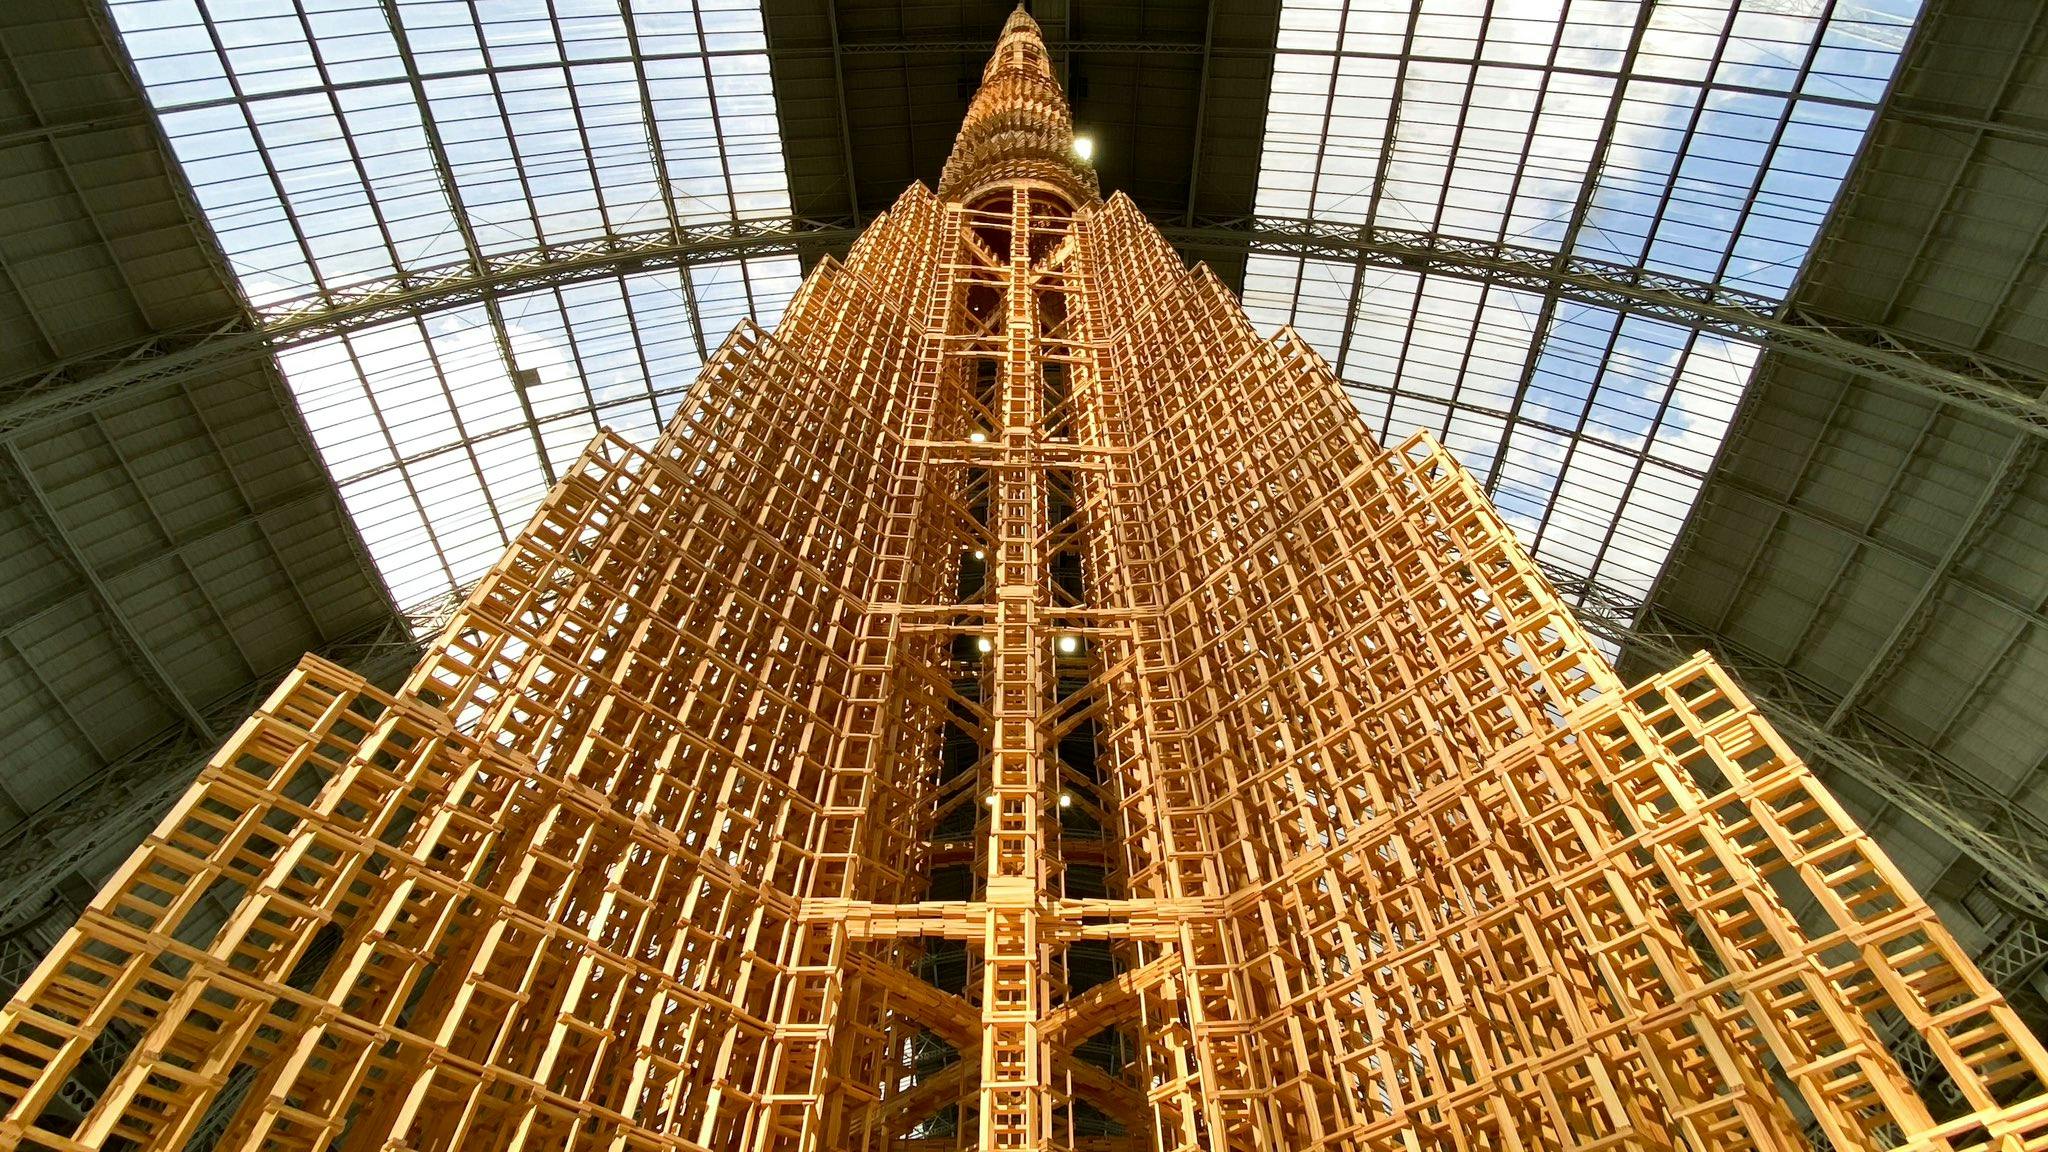 Artists Build the World’s Tallest Toy Tower